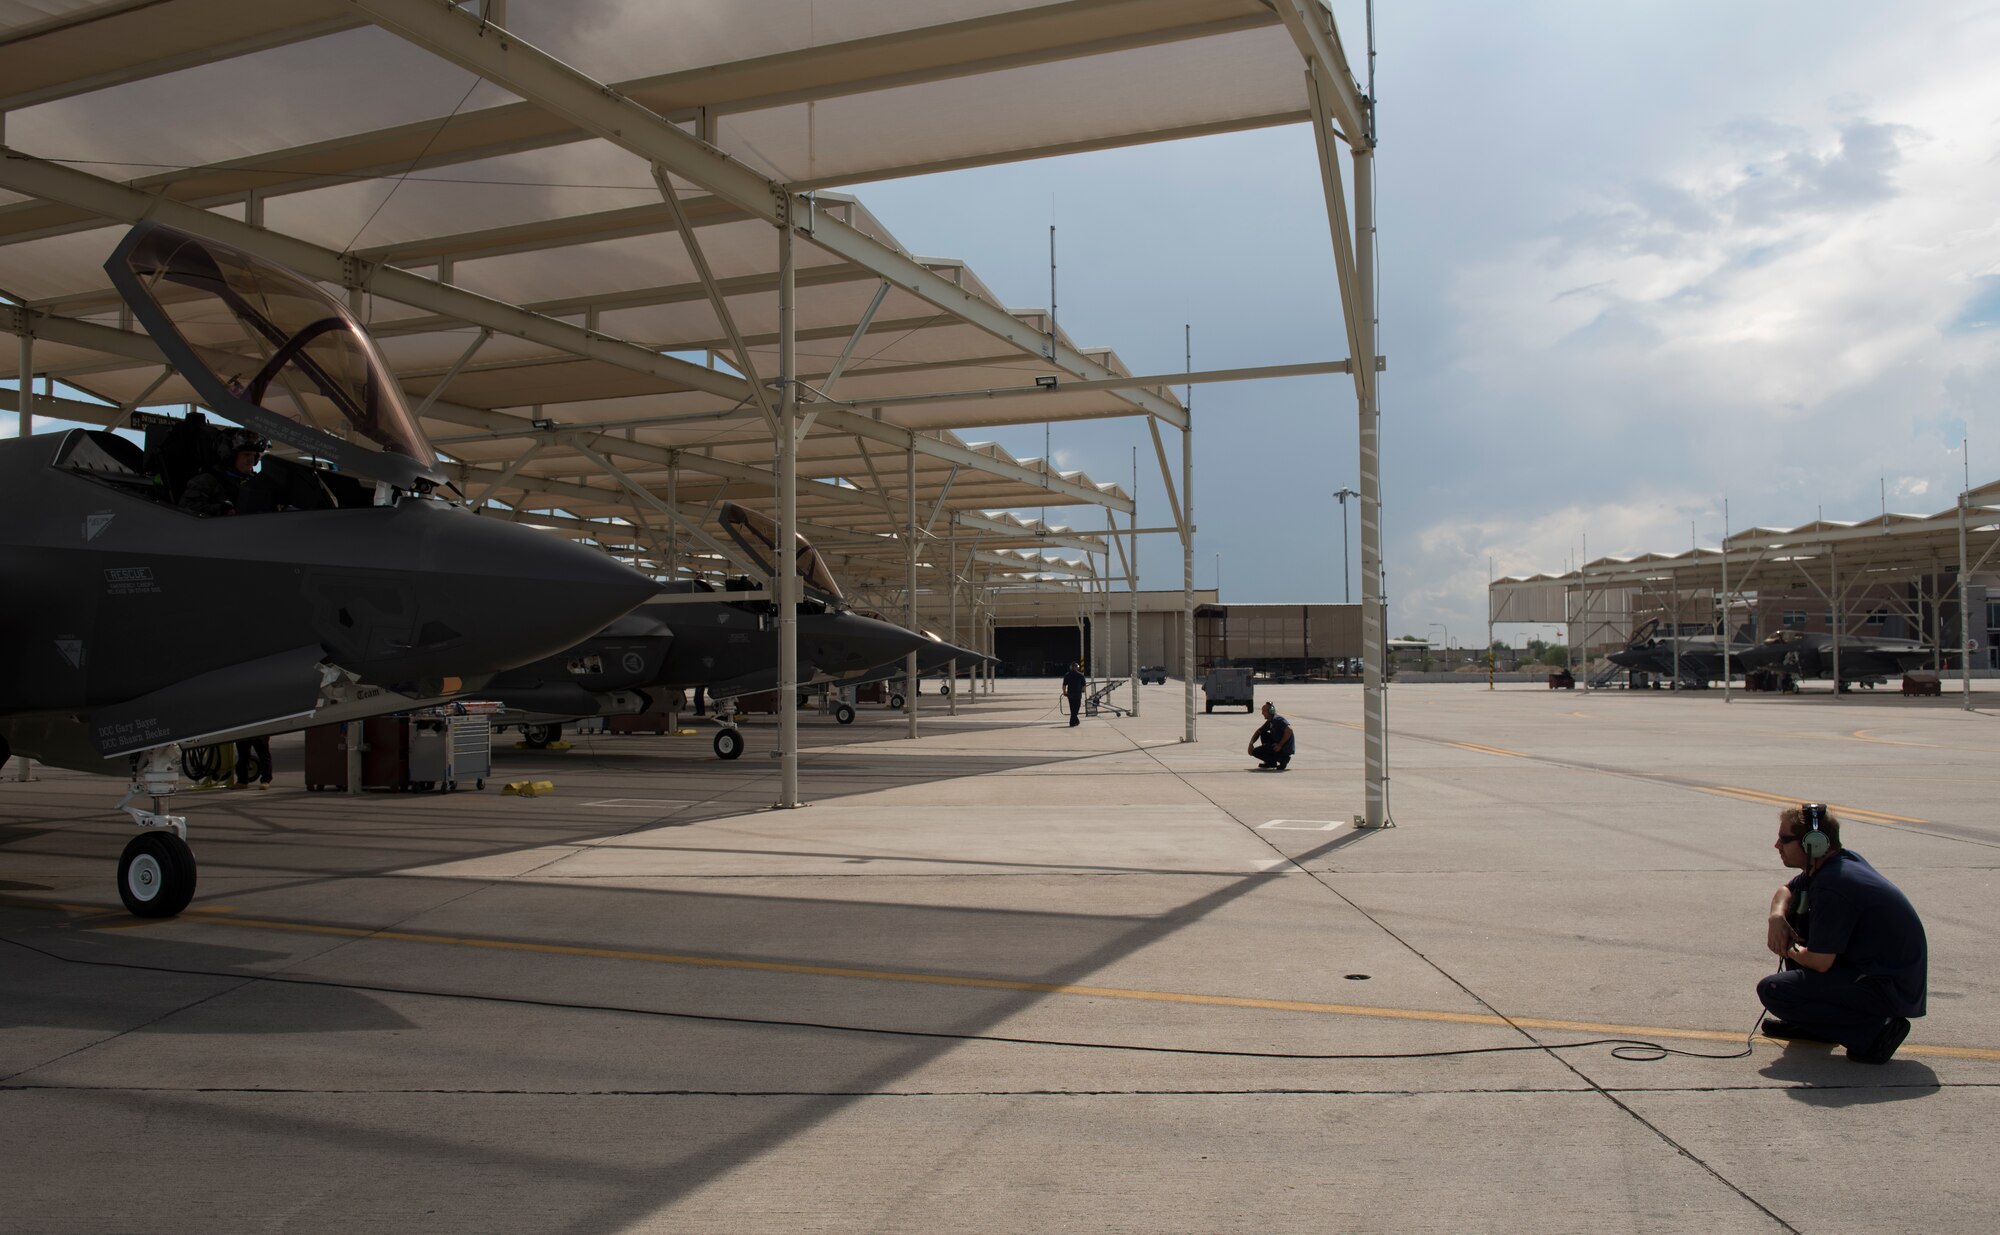 Lockheed Martin maintainers from the 62nd Aircraft Maintenance Unit prepare to taxi out several F-35A Lightning IIs for a sortie Aug. 22, 2018, at Luke Air Force Base, Ariz.